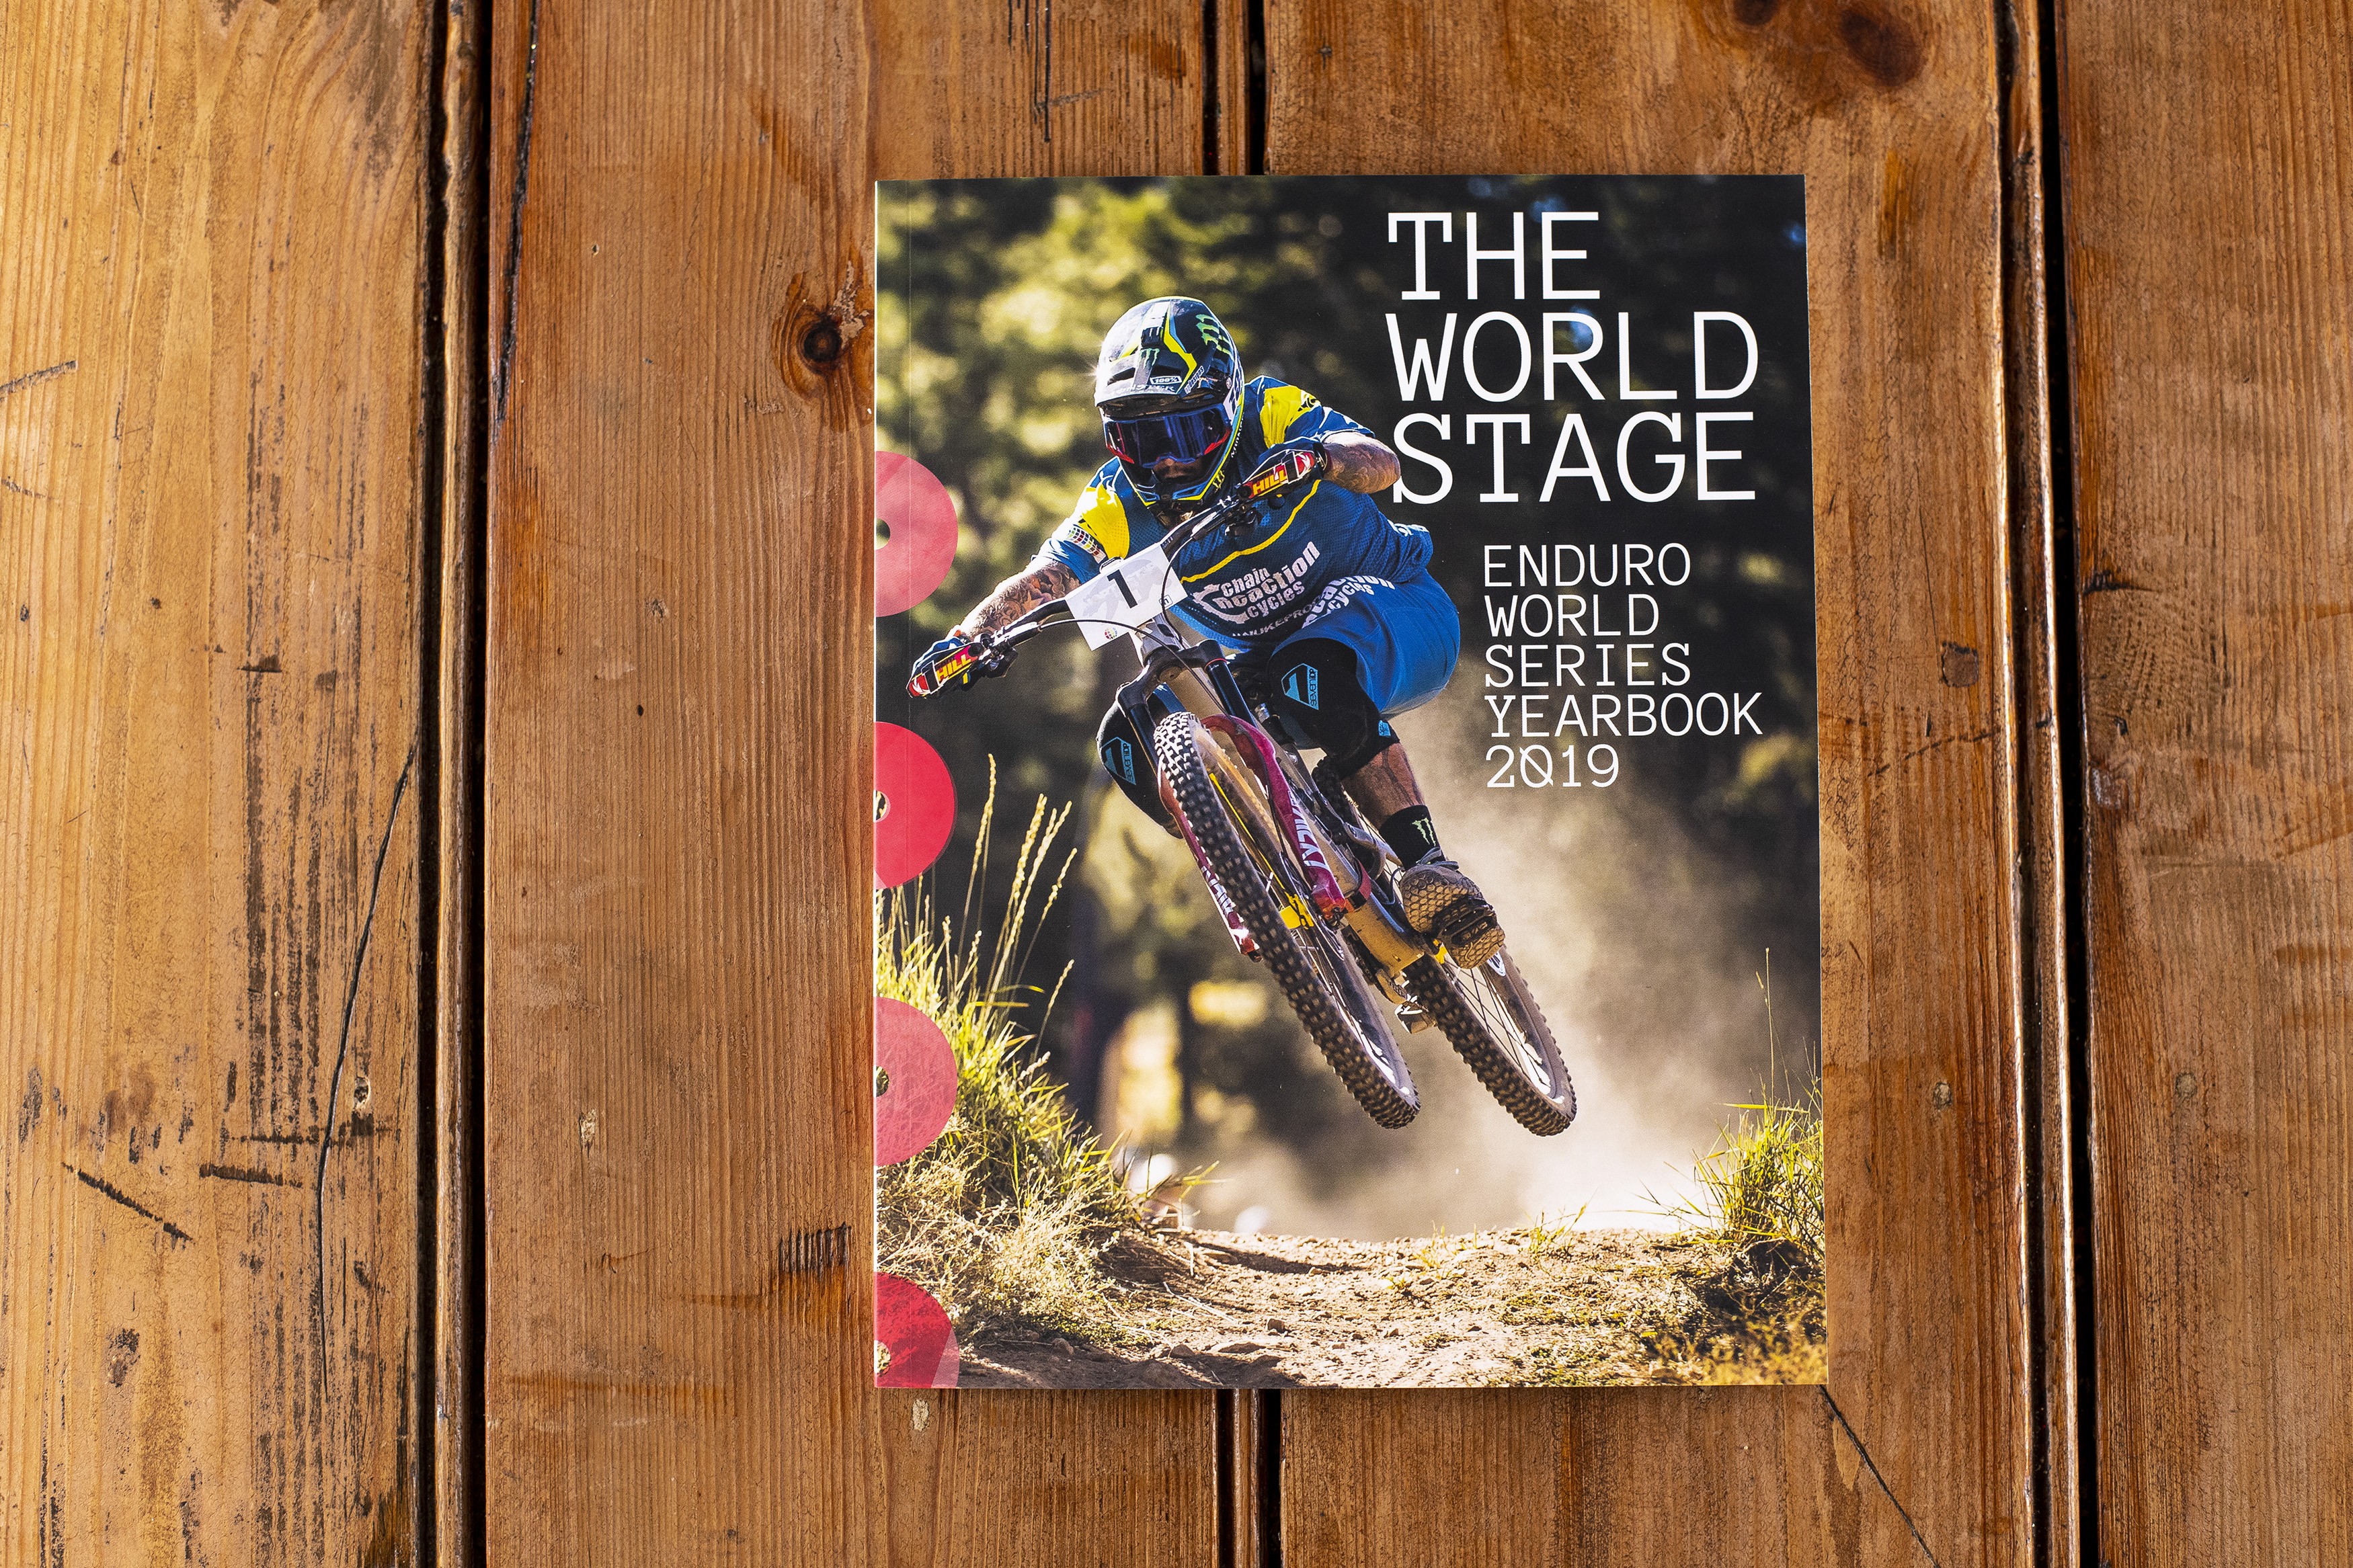 The World Stage III

PIC © Andy Lloyd